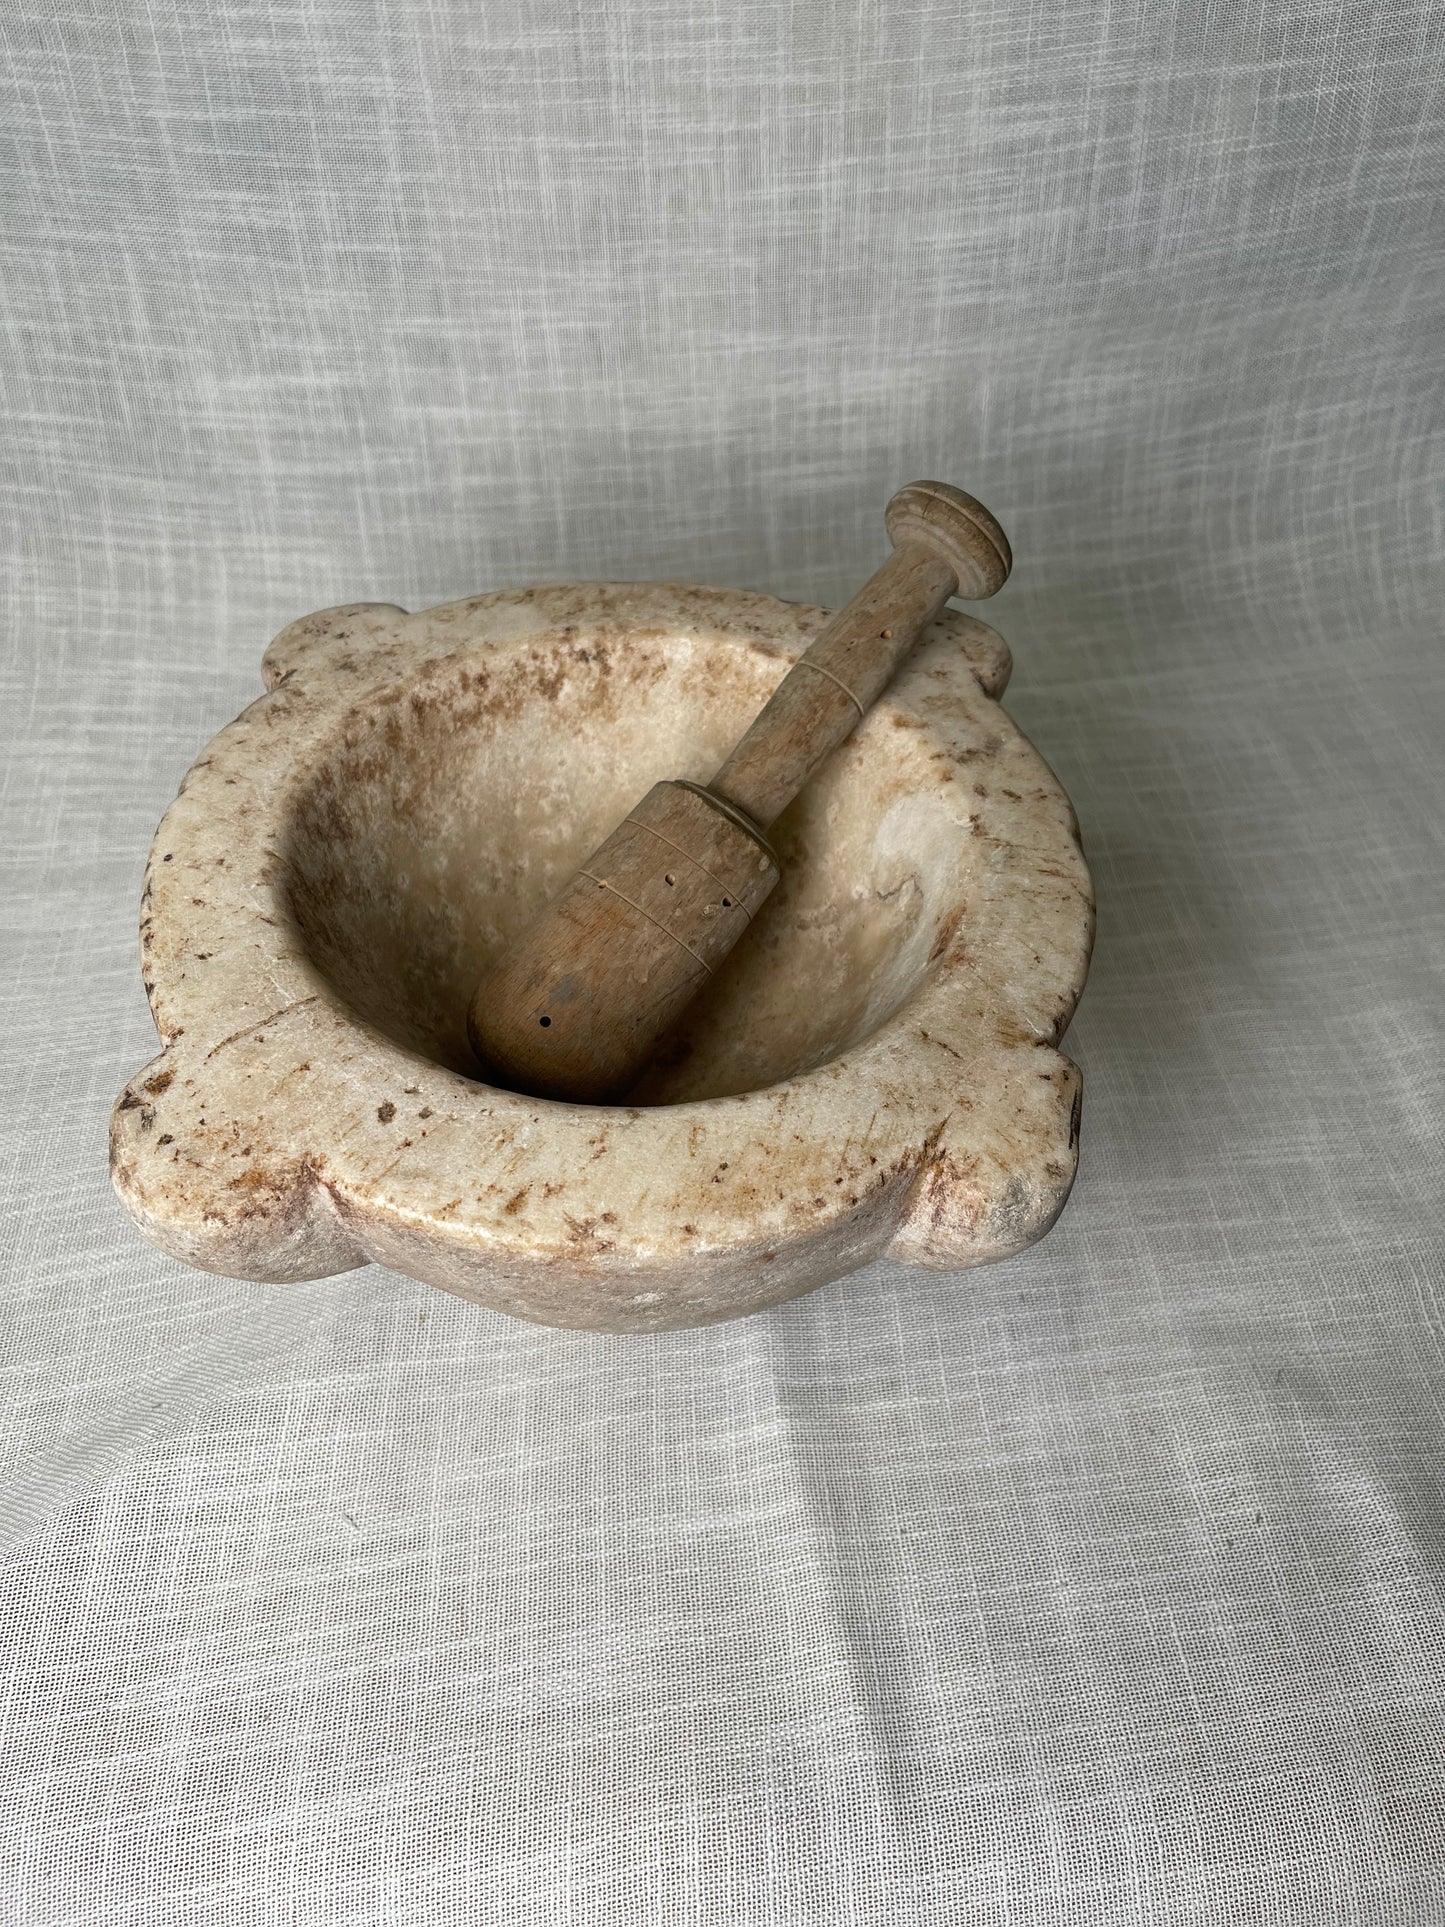 Vintage Marble Mortar and Wooden Pestle from Spain